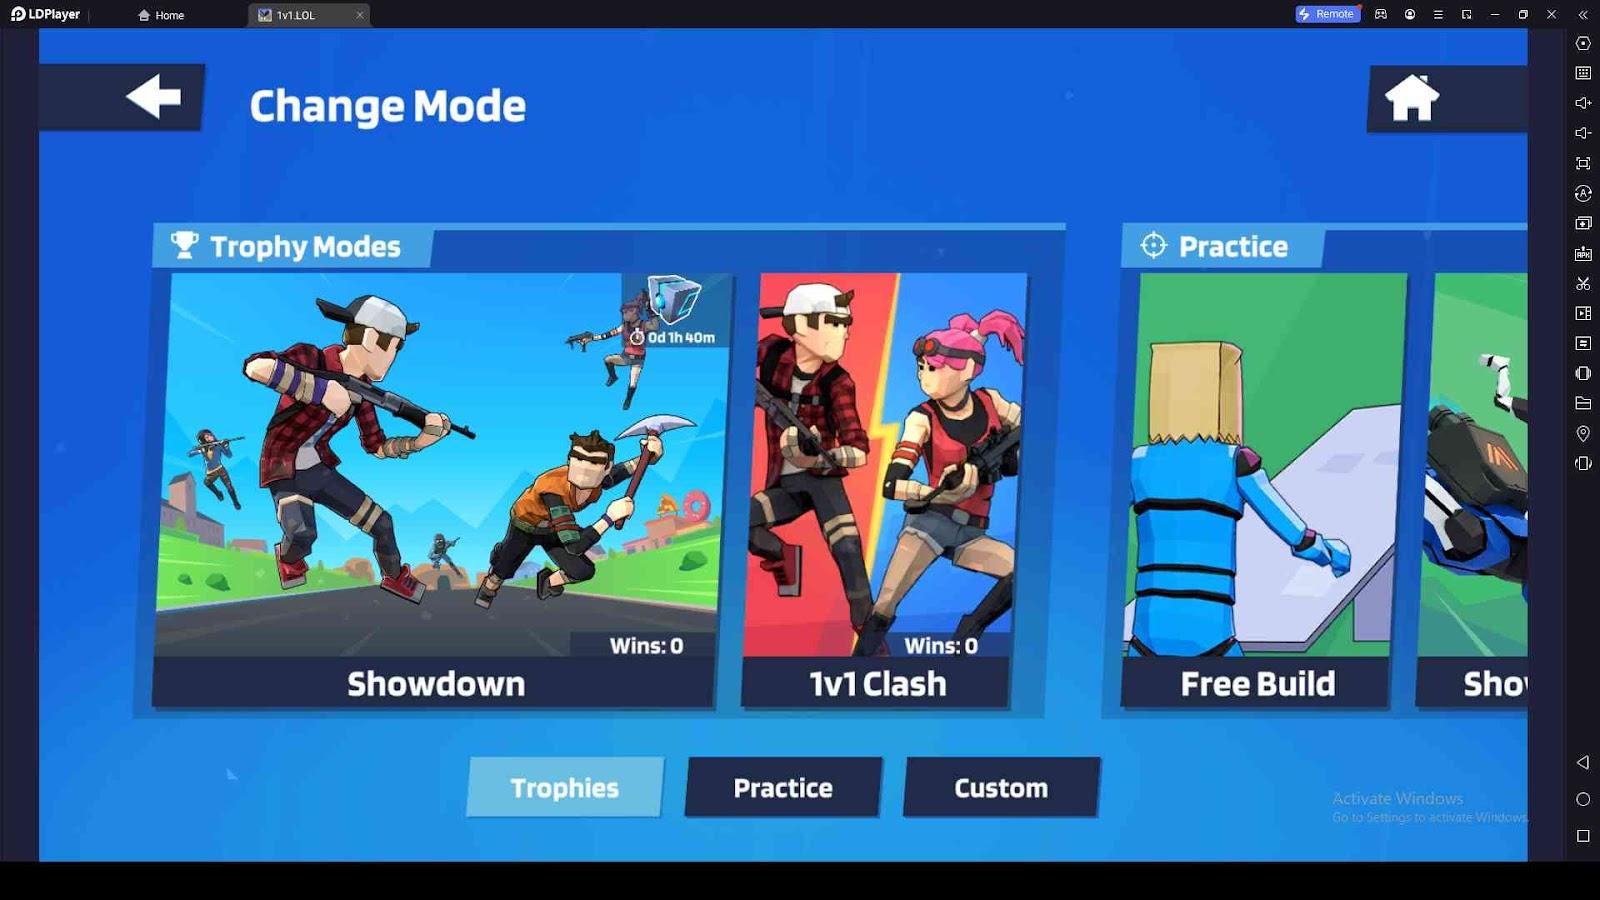 What are the Playable Modes in 1v1.LOL - Battle Royale Game